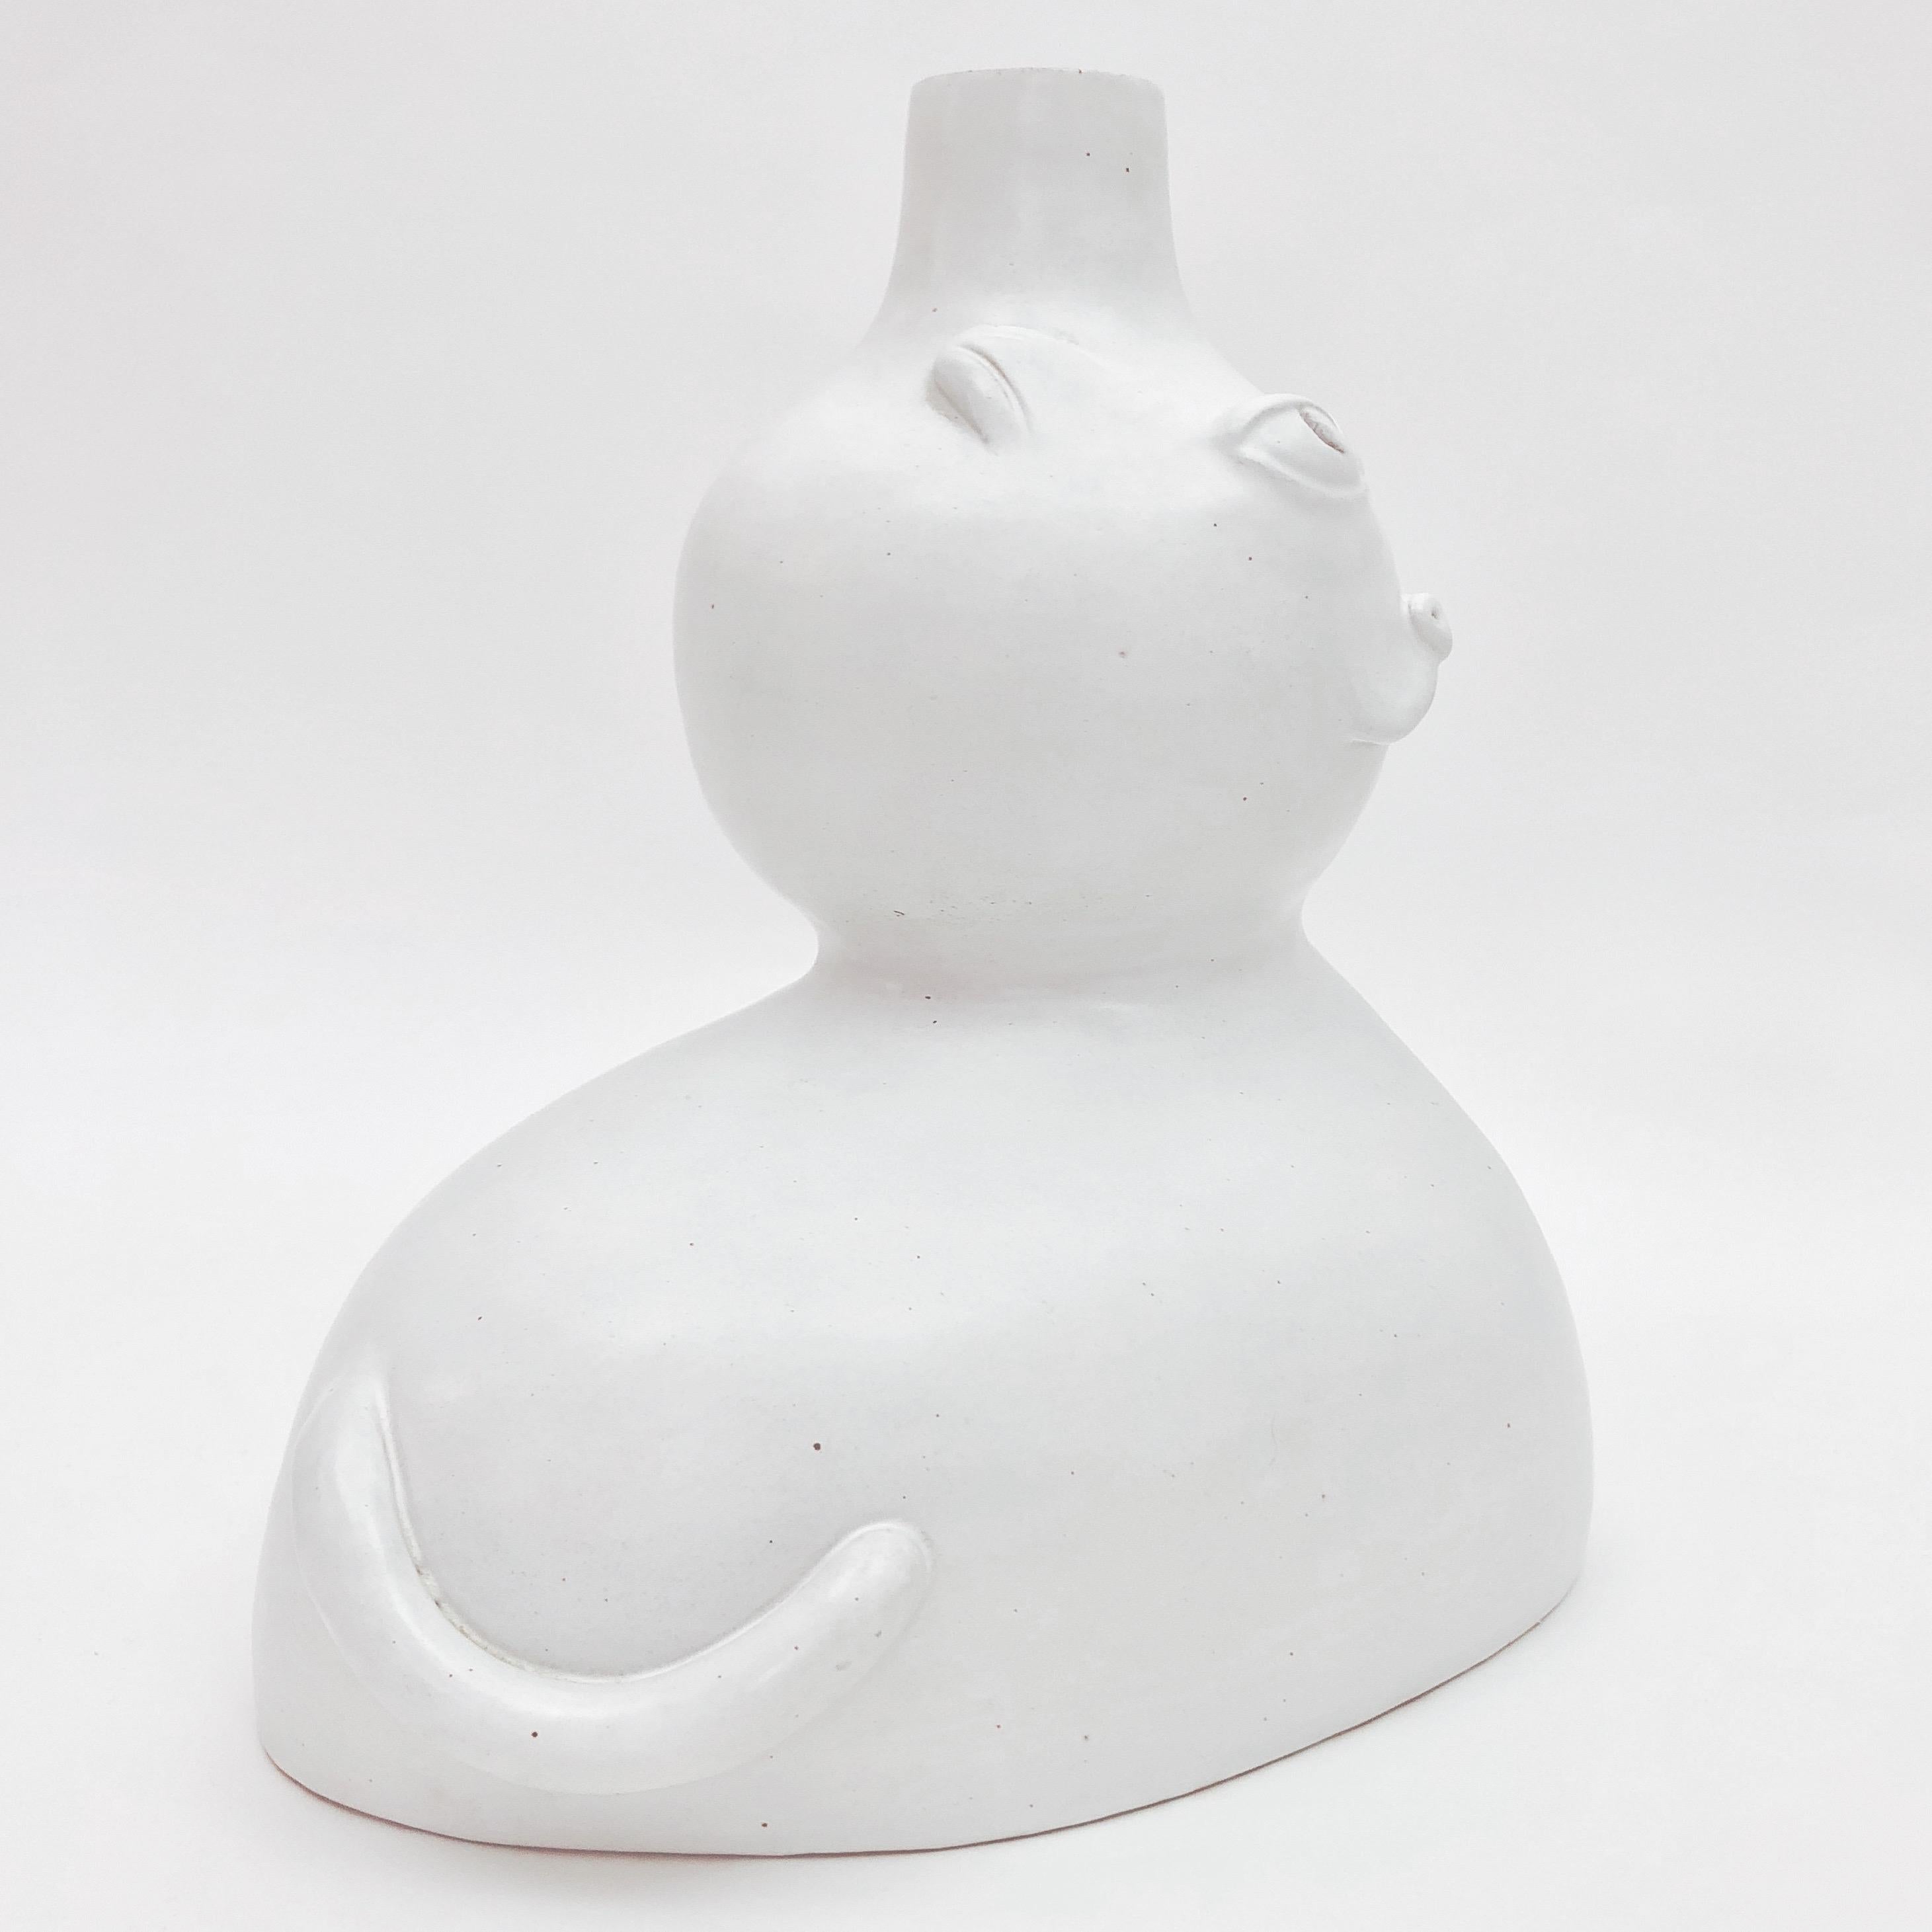 Ceramic sculpture forming table lamp-base in shape of a stylized cat, textured ceramic enameled in white.
One of a kind handmade artwork signed and numerated by the French ceramicists, Dalo. 

Height measurement concerns the ceramic sculpture